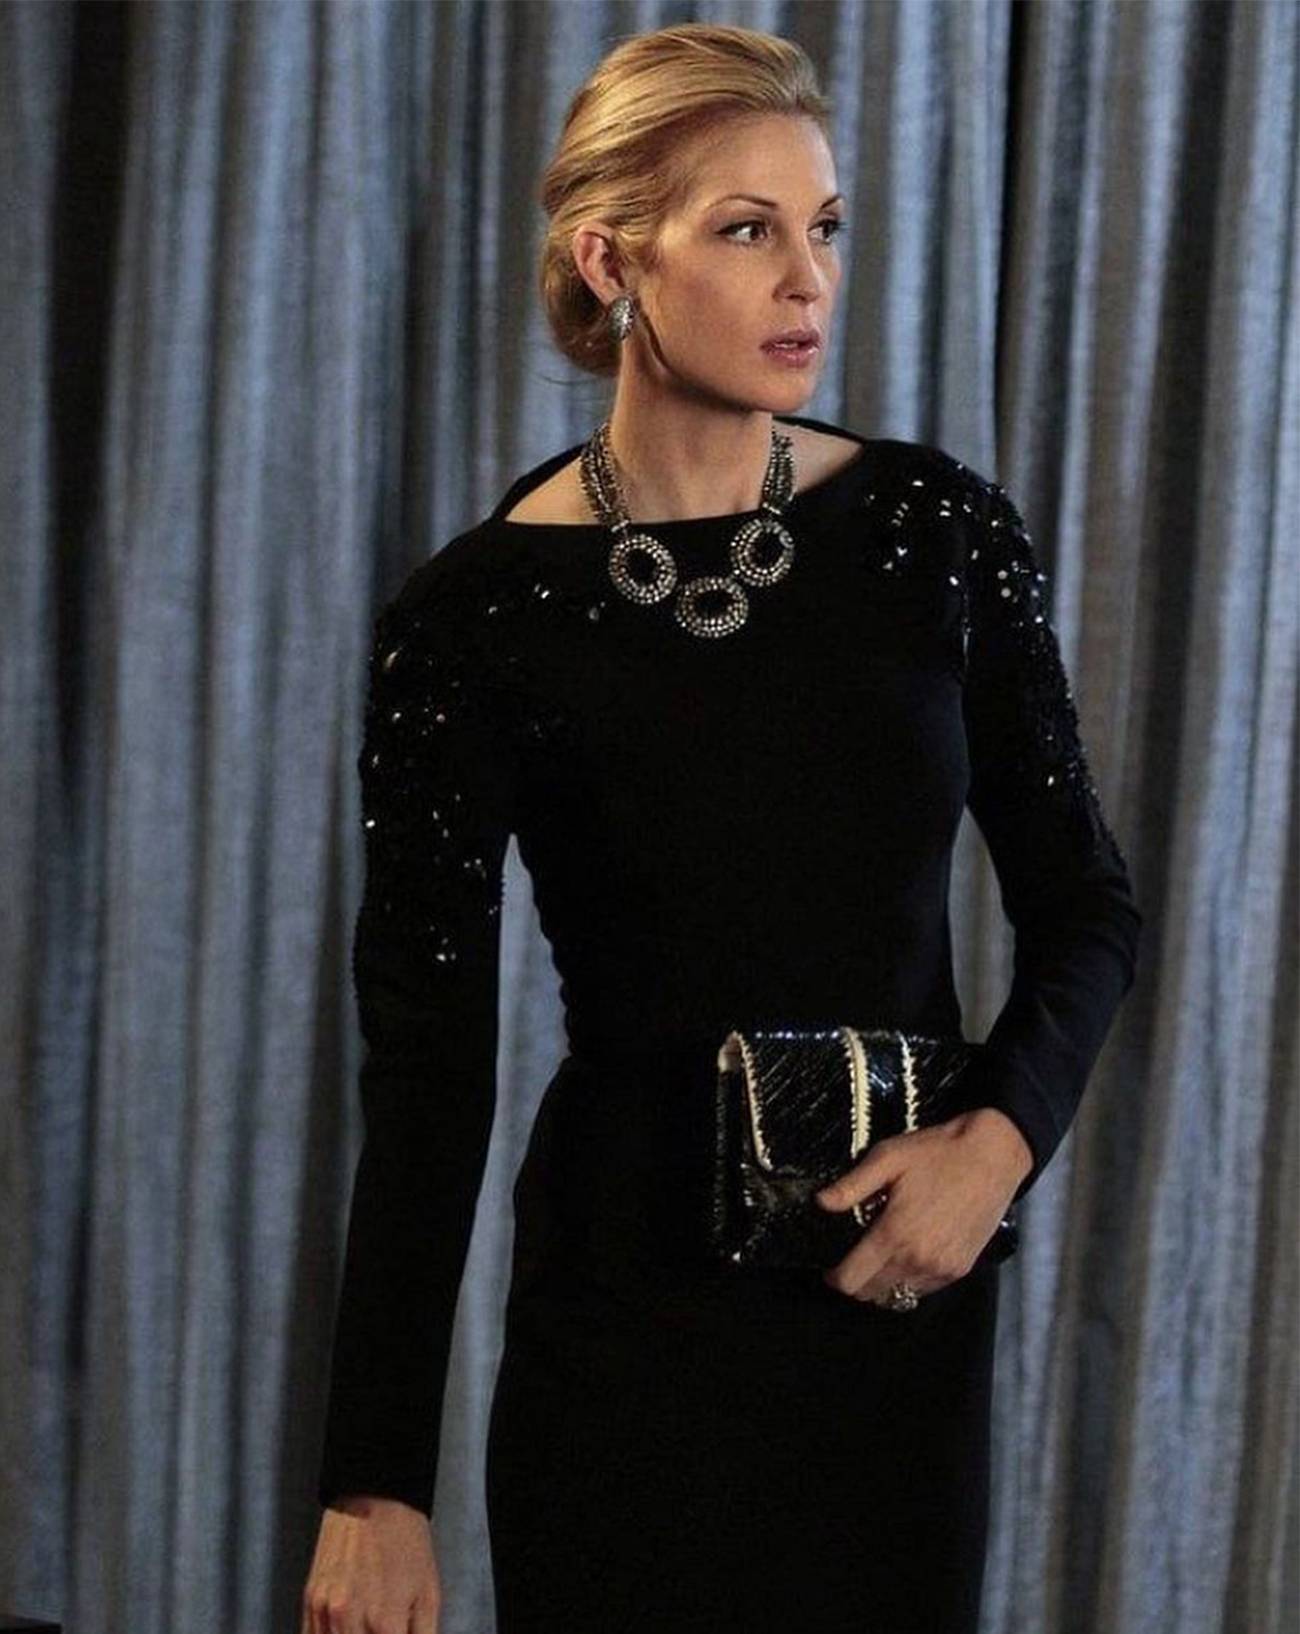 Why does Kelly Rutherford keep appealing to the fashion world?